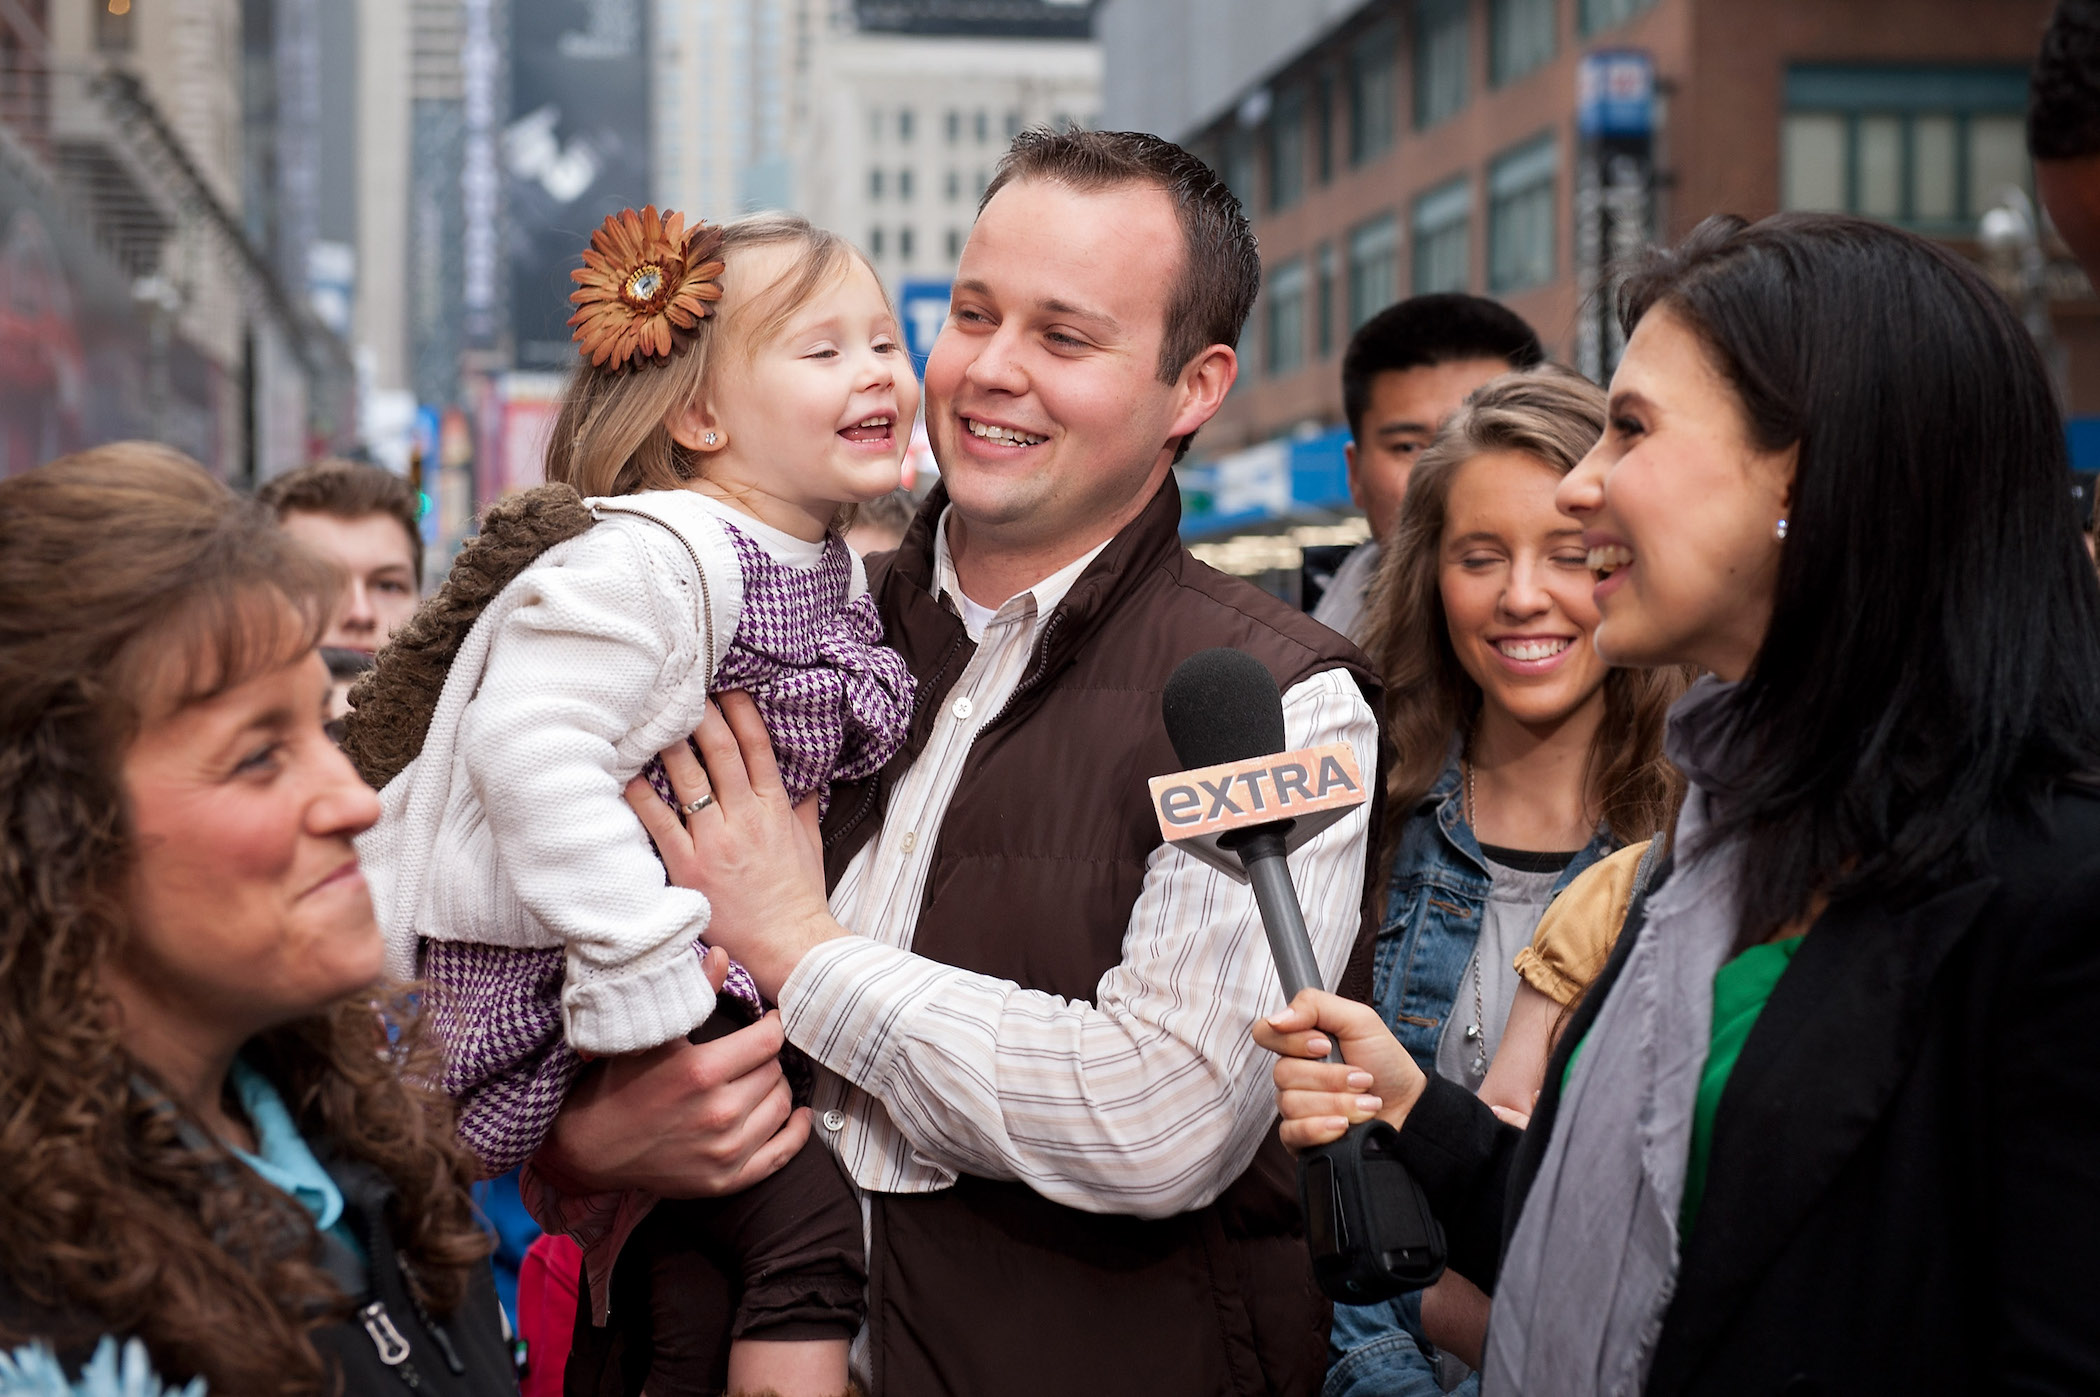 Josh Duggar and his daughter during their visit with 'Extra' surrounded by the rest of the Duggar family from 'Counting On'